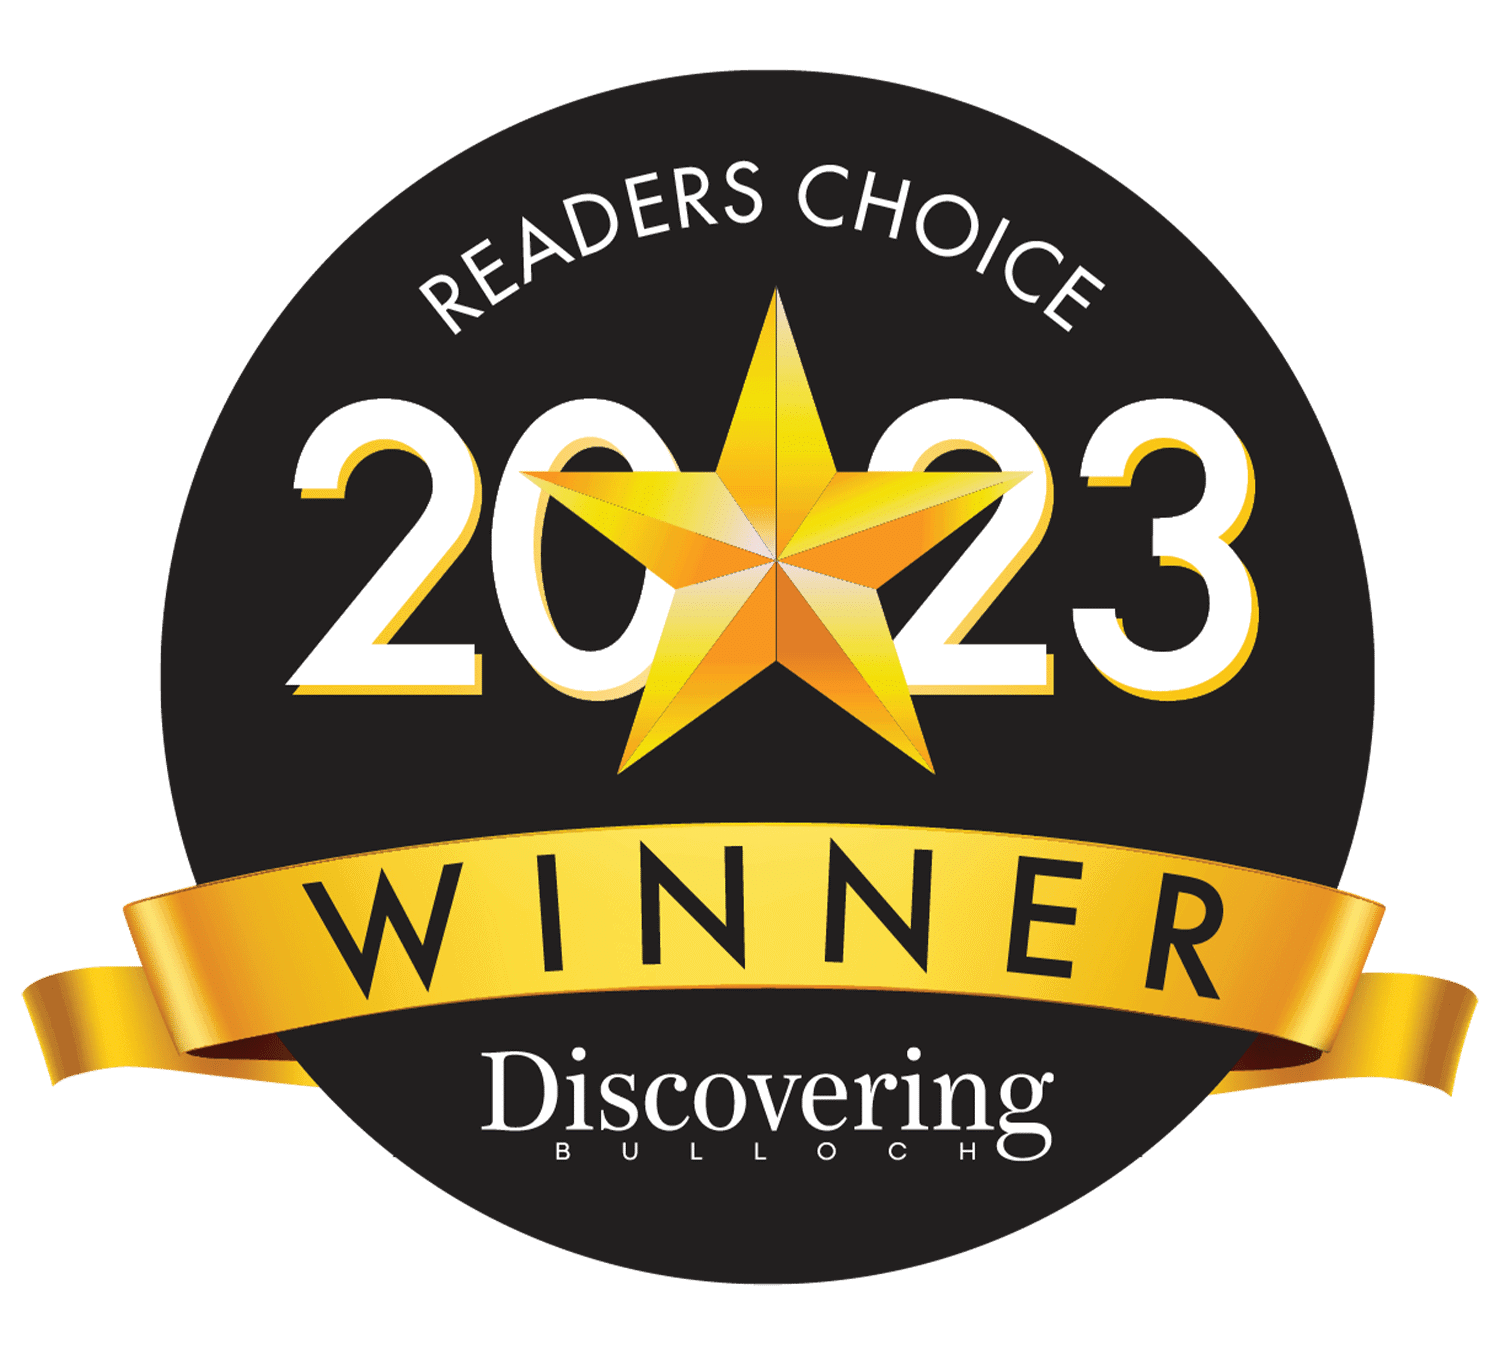 The 2023 Readers Choice Winner features a black circle and a gold star.